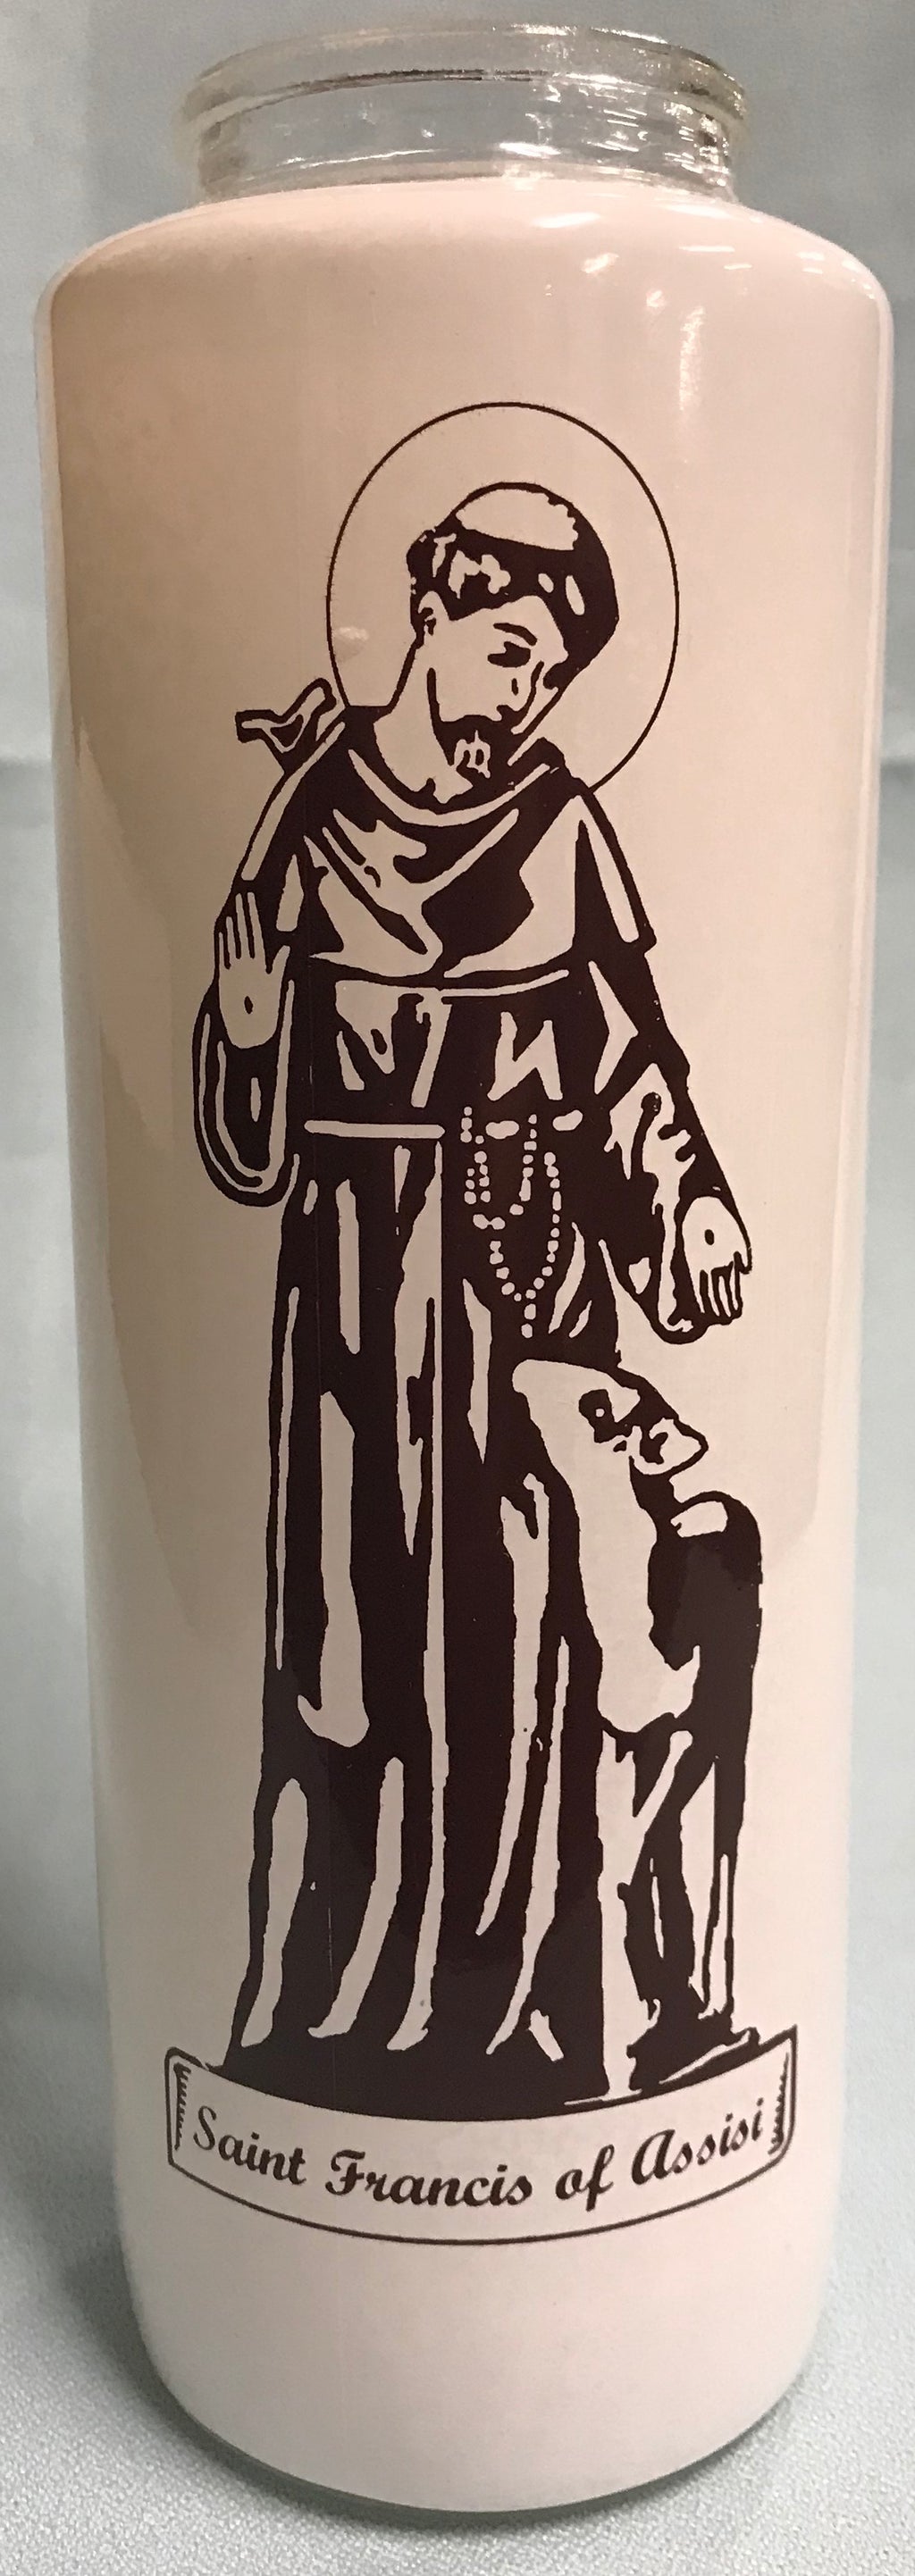 6-DAY ST FRANCIS CANDLE